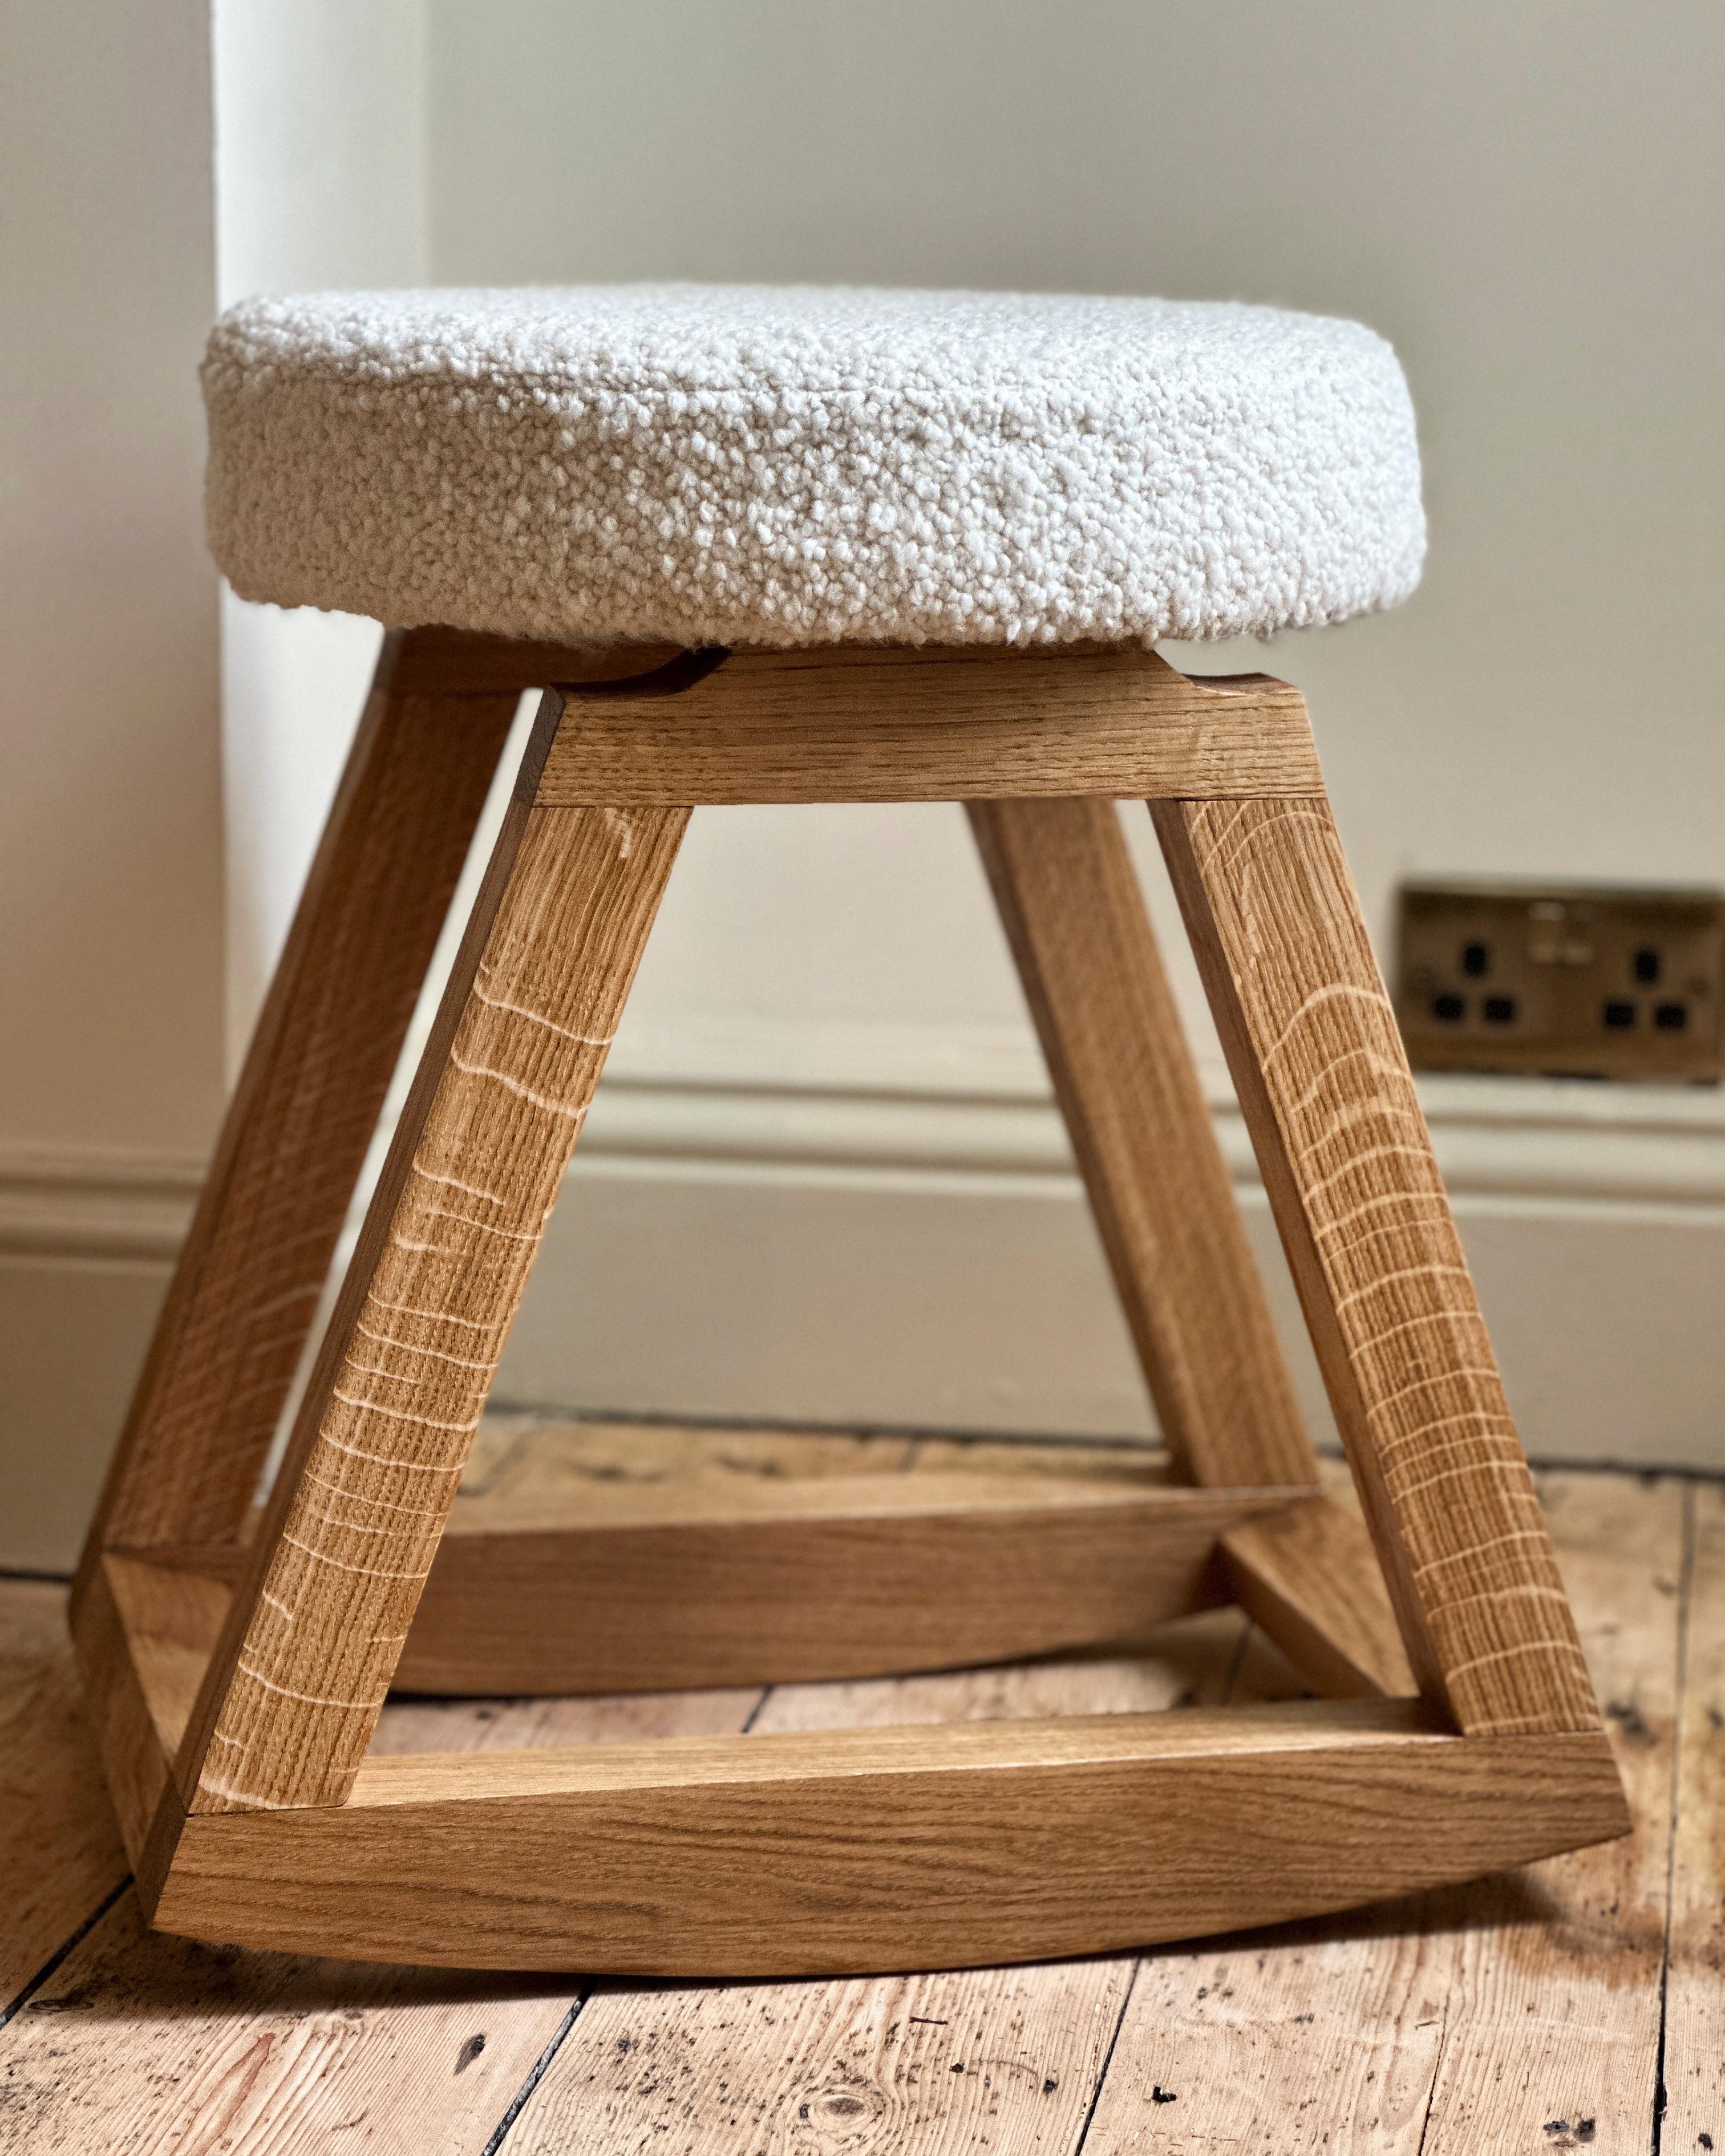 A collection piece exclusive to Alexander & Ellis, and designed by Founder Oliver A-J, the Rocker Stool was designed and handcrafted in house with the finest Oak and Bouclé upholstery. 
Available in other wood species’ and fabrics, the Rocker Stool